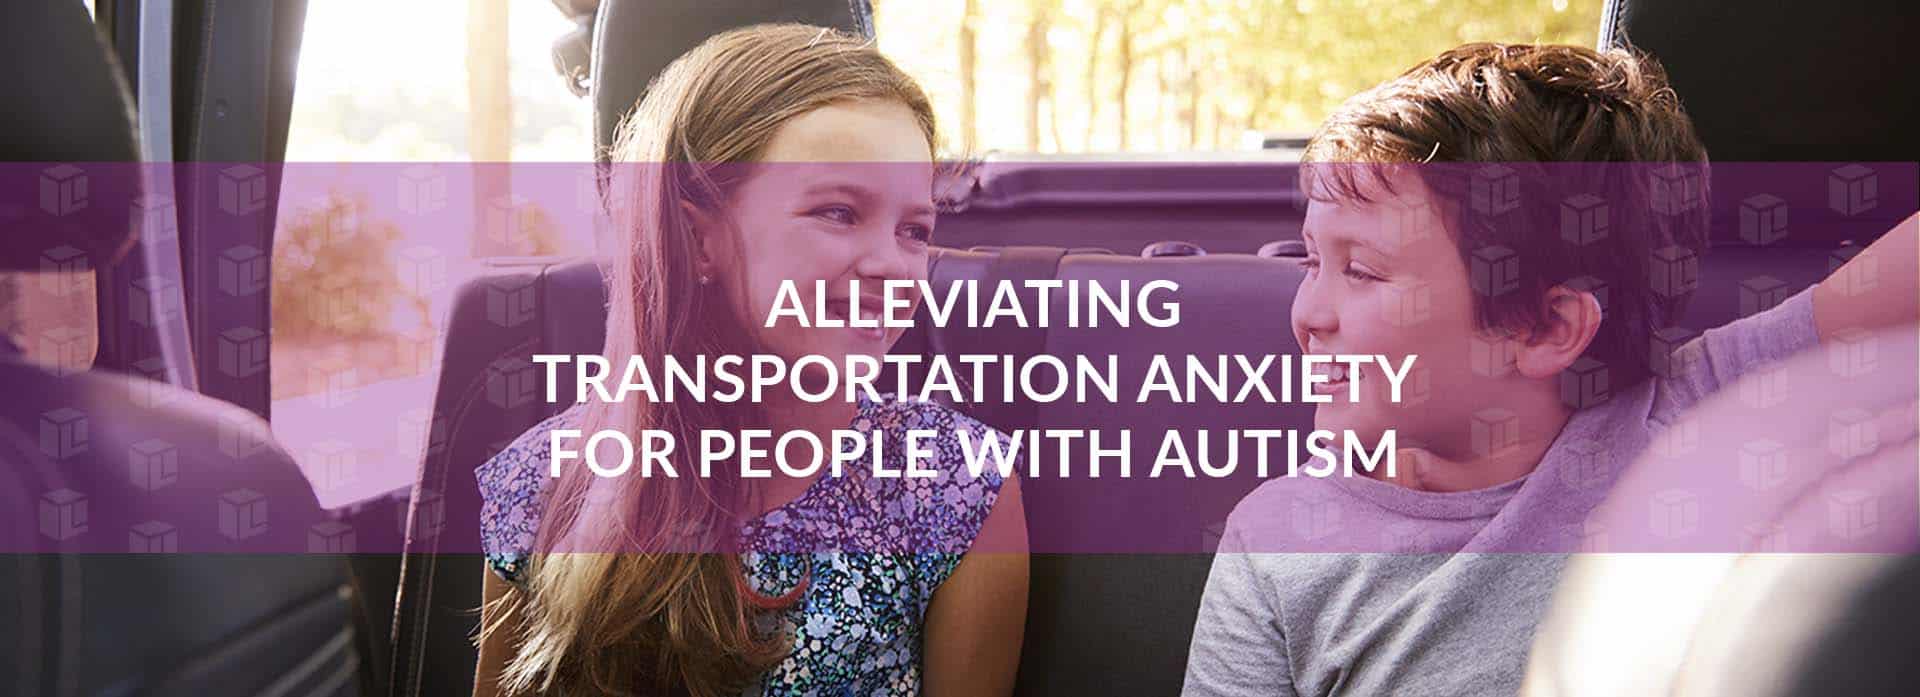 Alleviating Transportation Anxiety For People With Autism